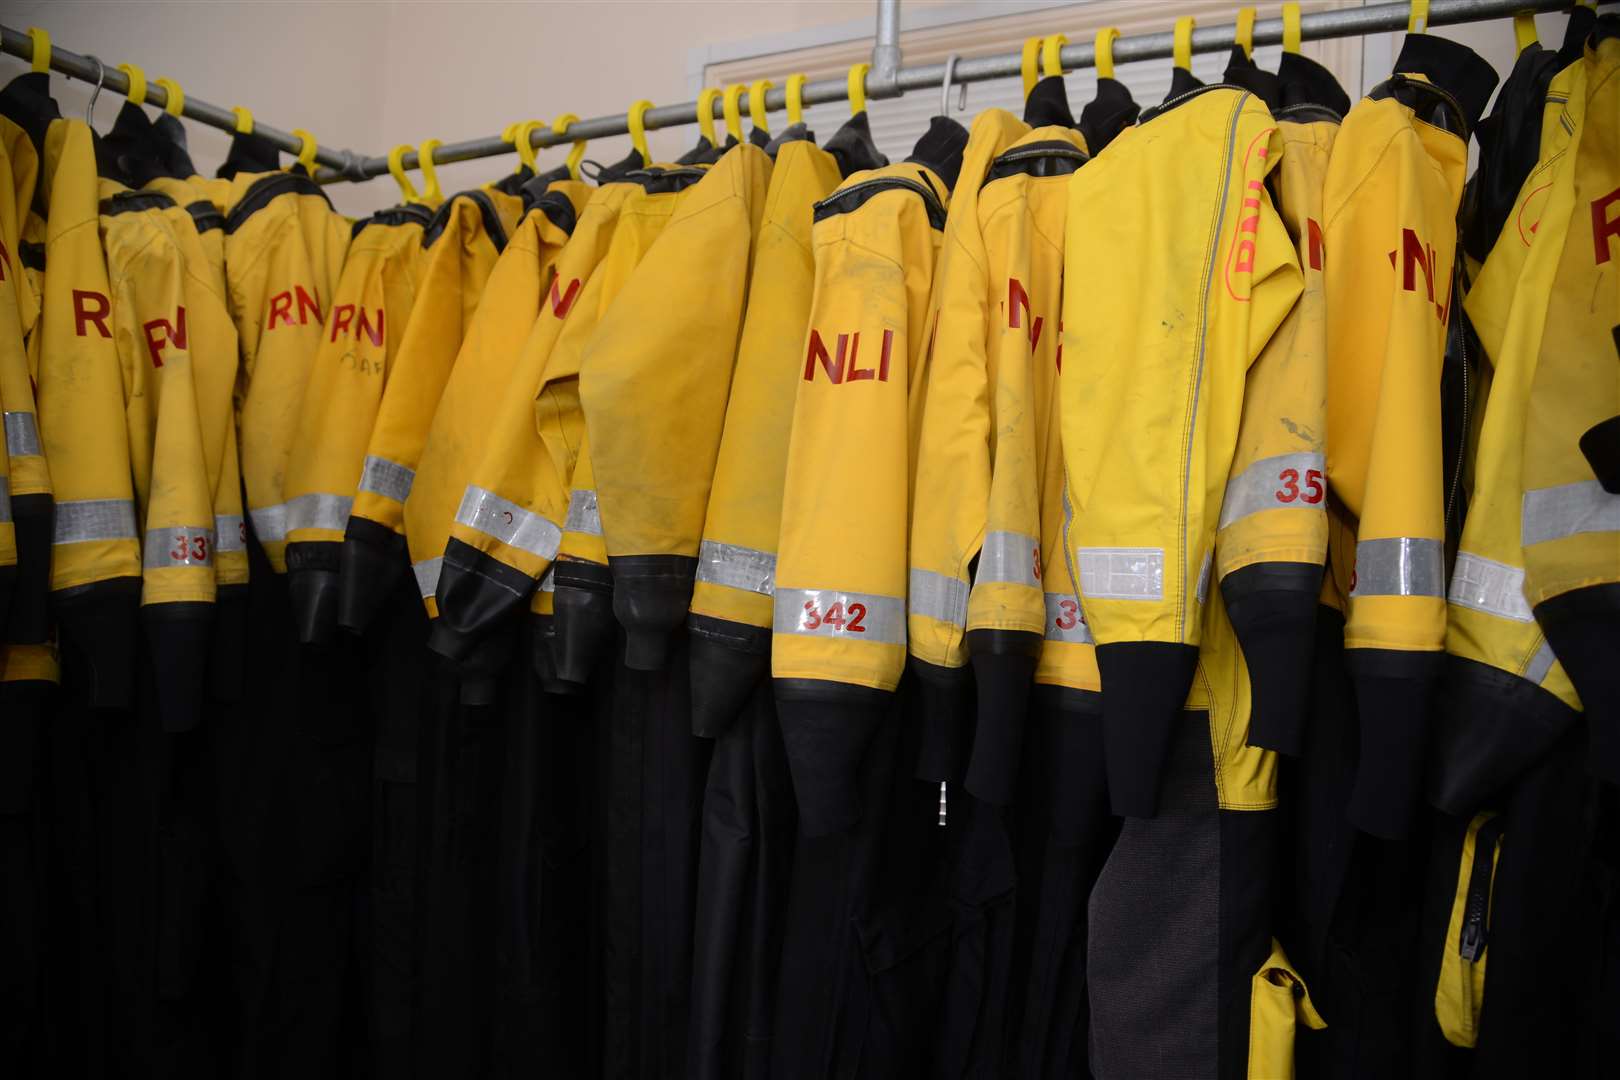 Crew members suits lined up in the locker room